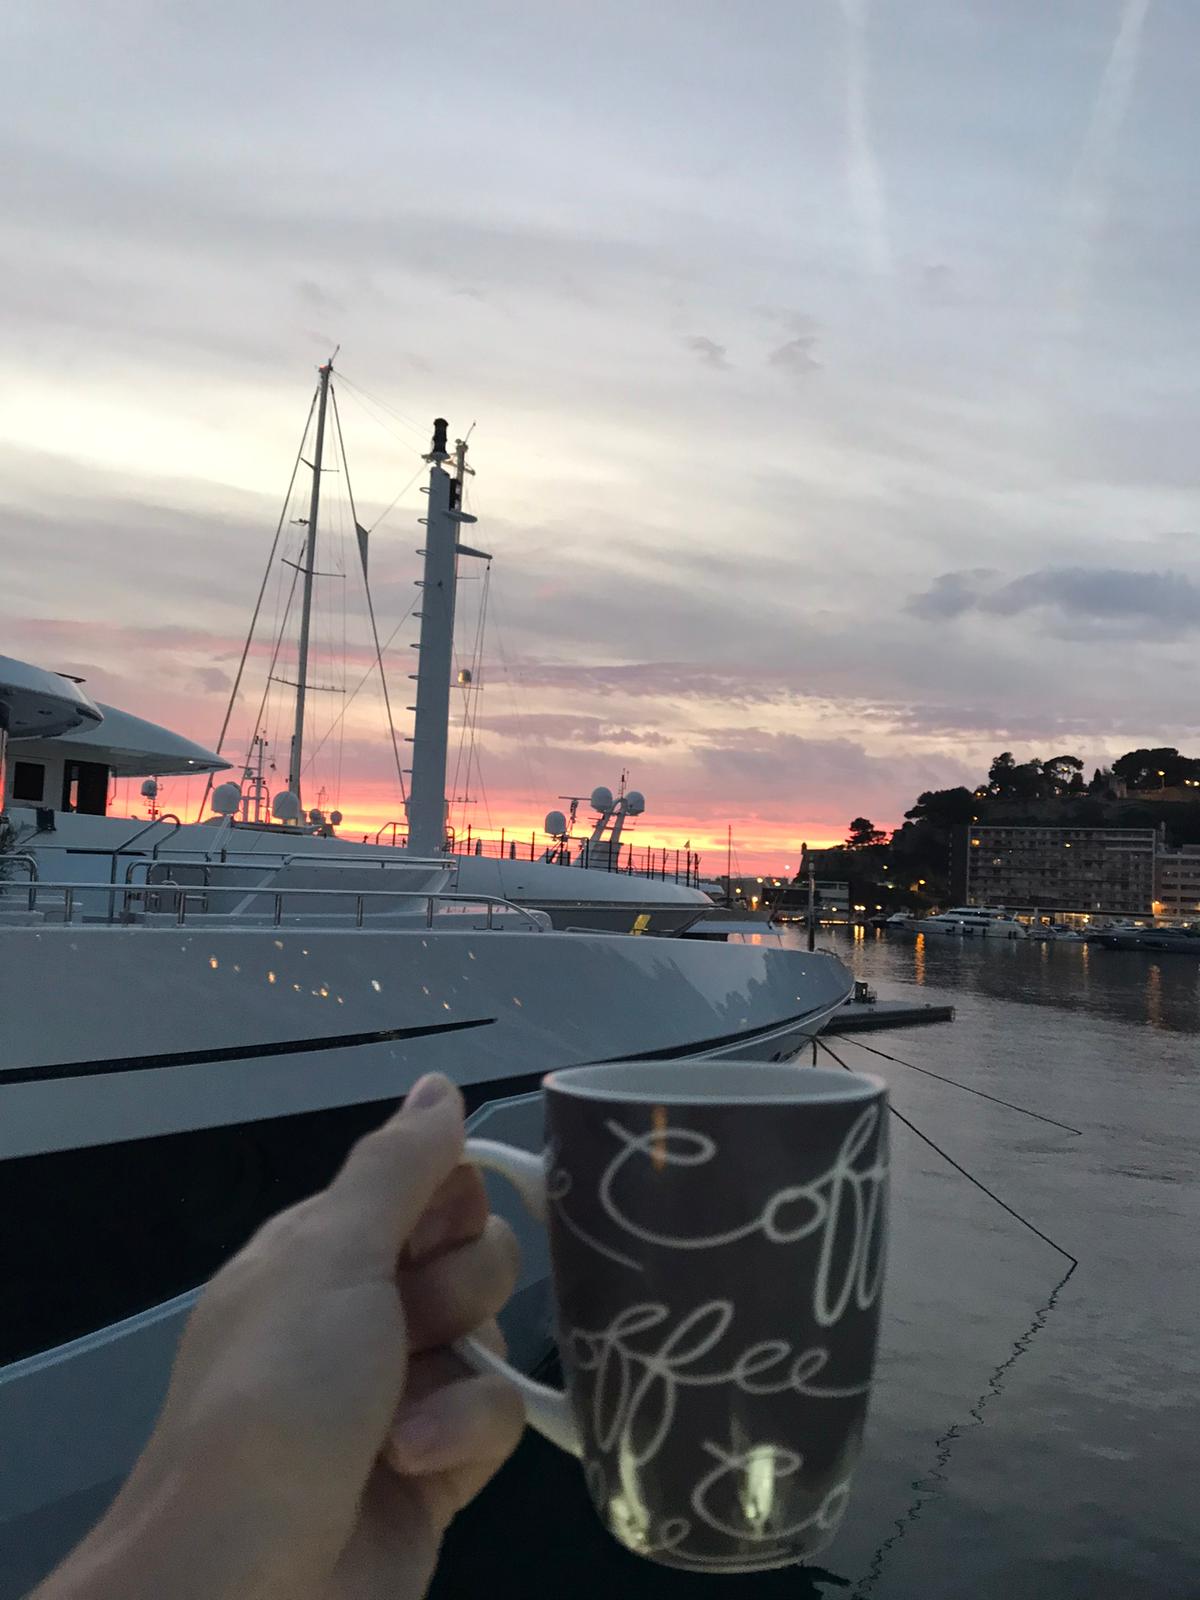 A day of a yacht stewardess always starts with a fresh cup of coffee, usually as the dawn breaks